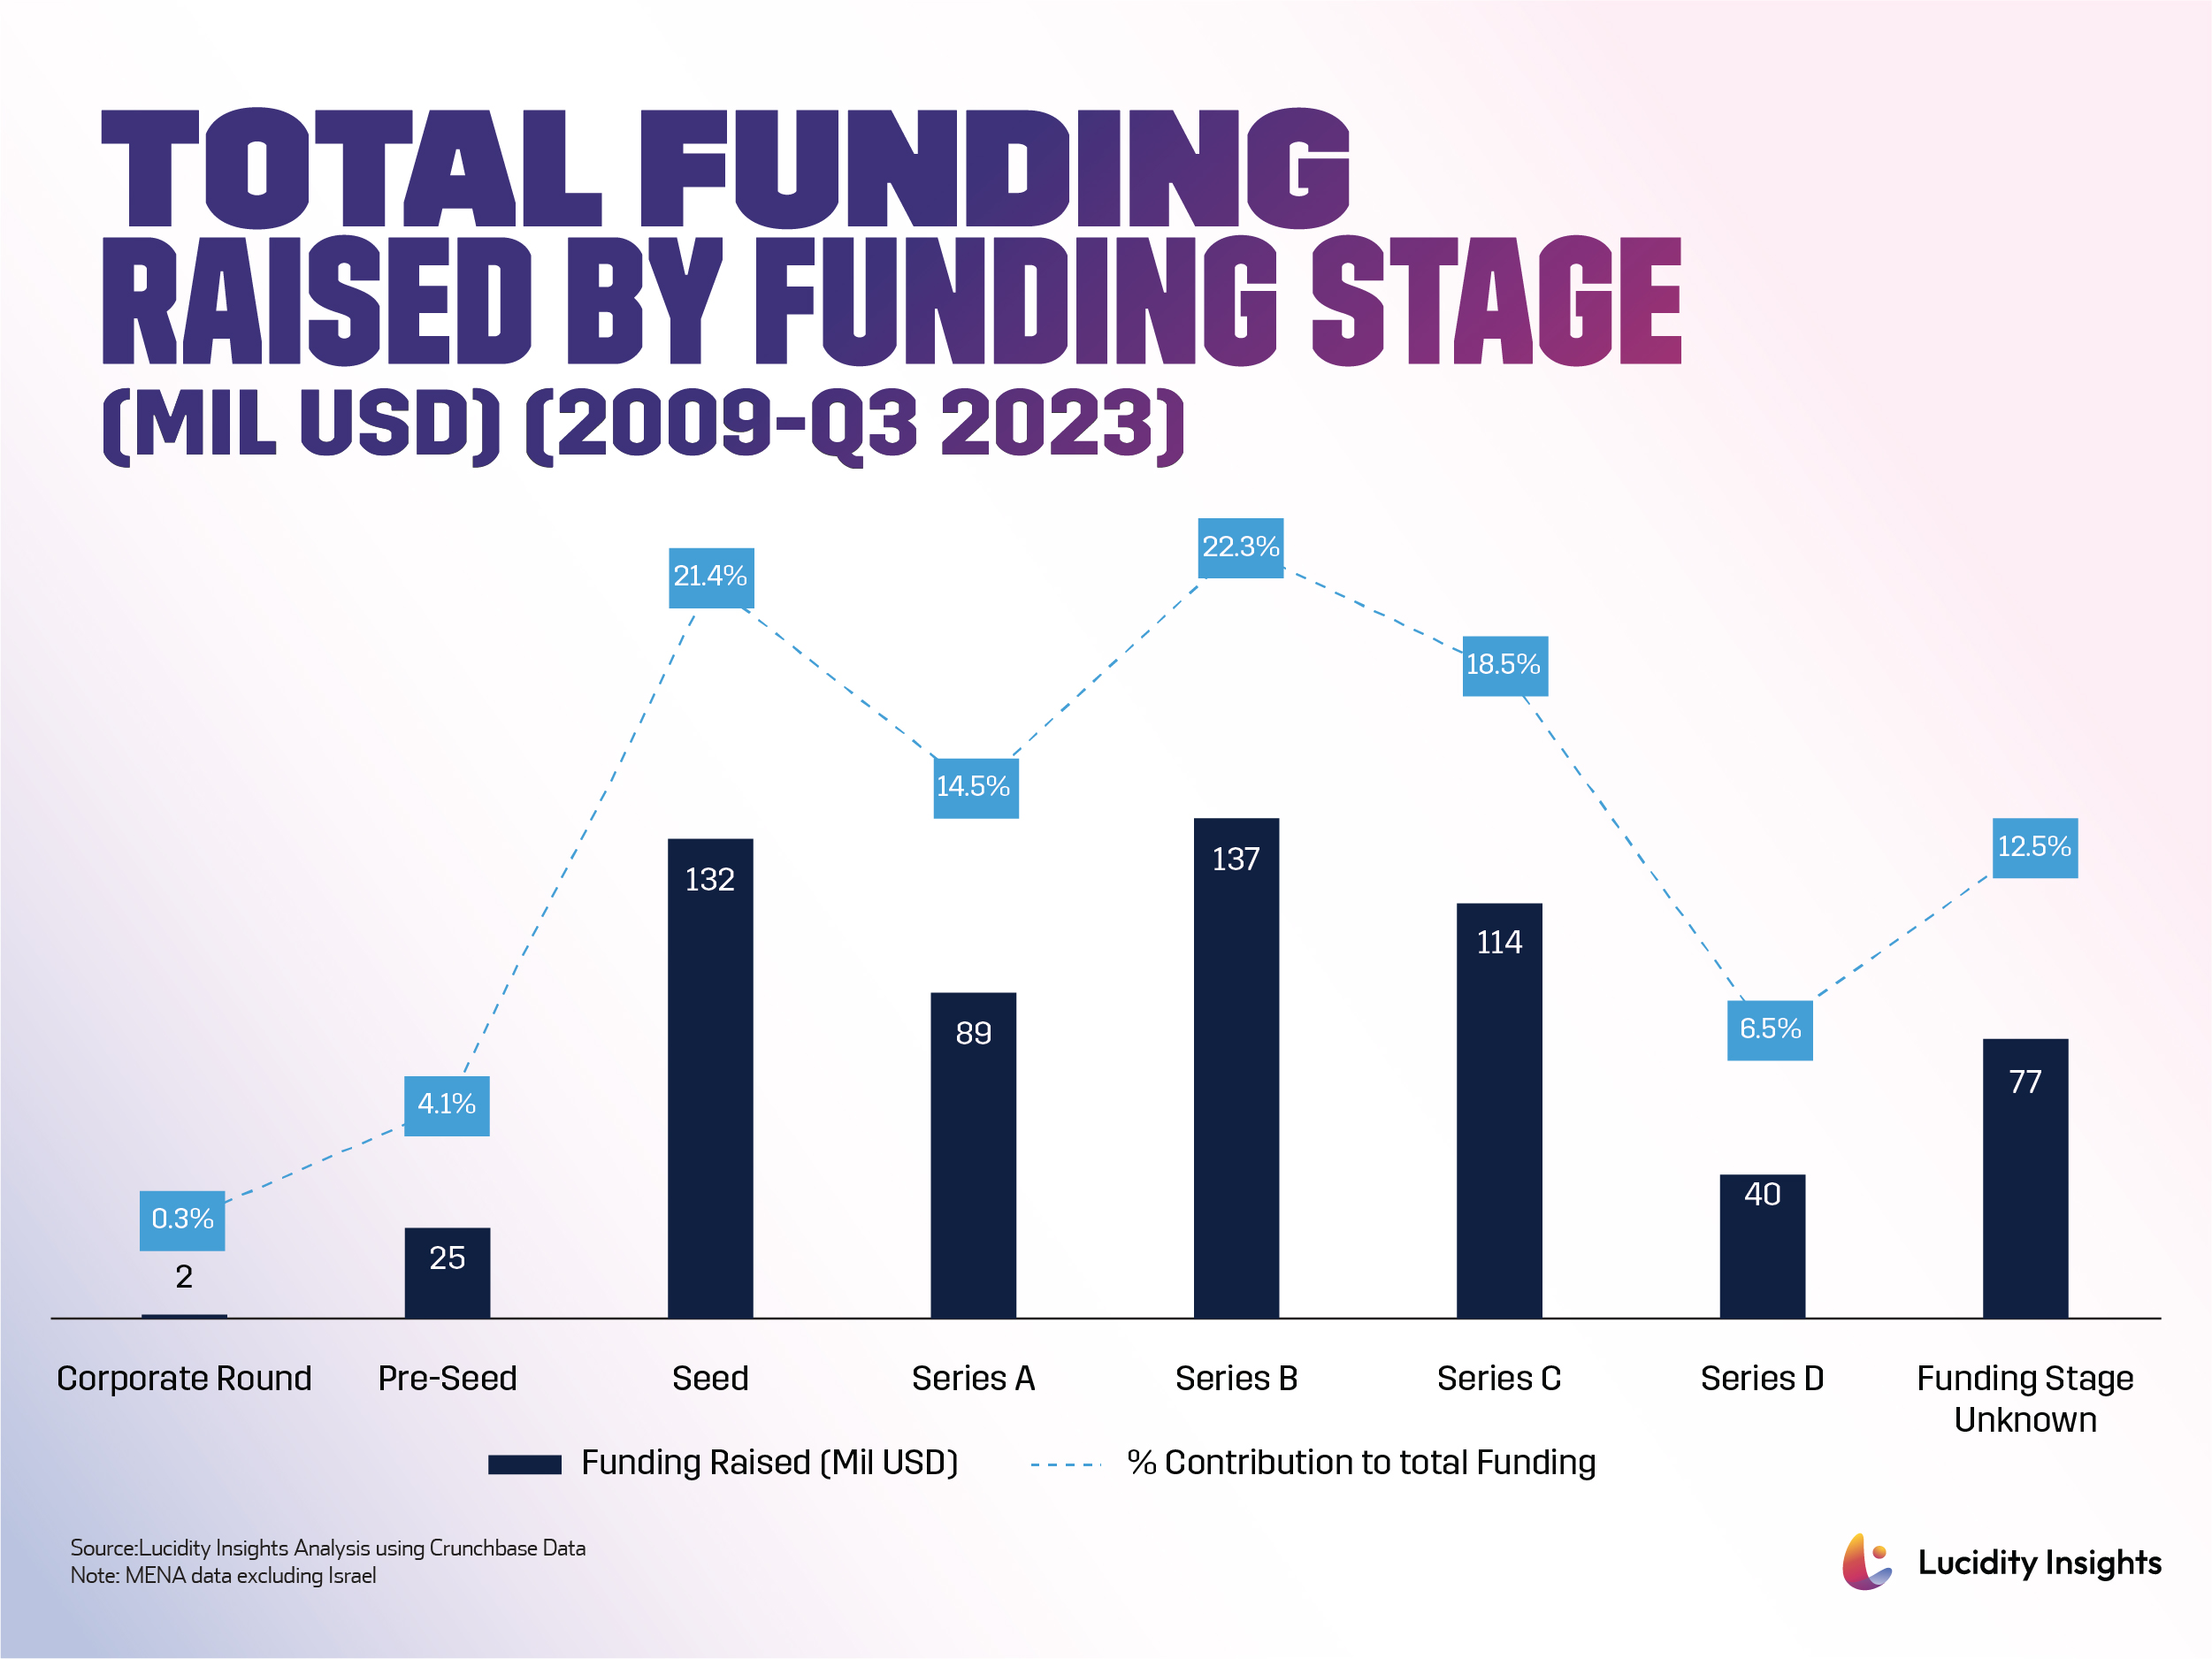 Total Funding Raised by Funding Stage (Mil USD) (2009-Q3 2023)